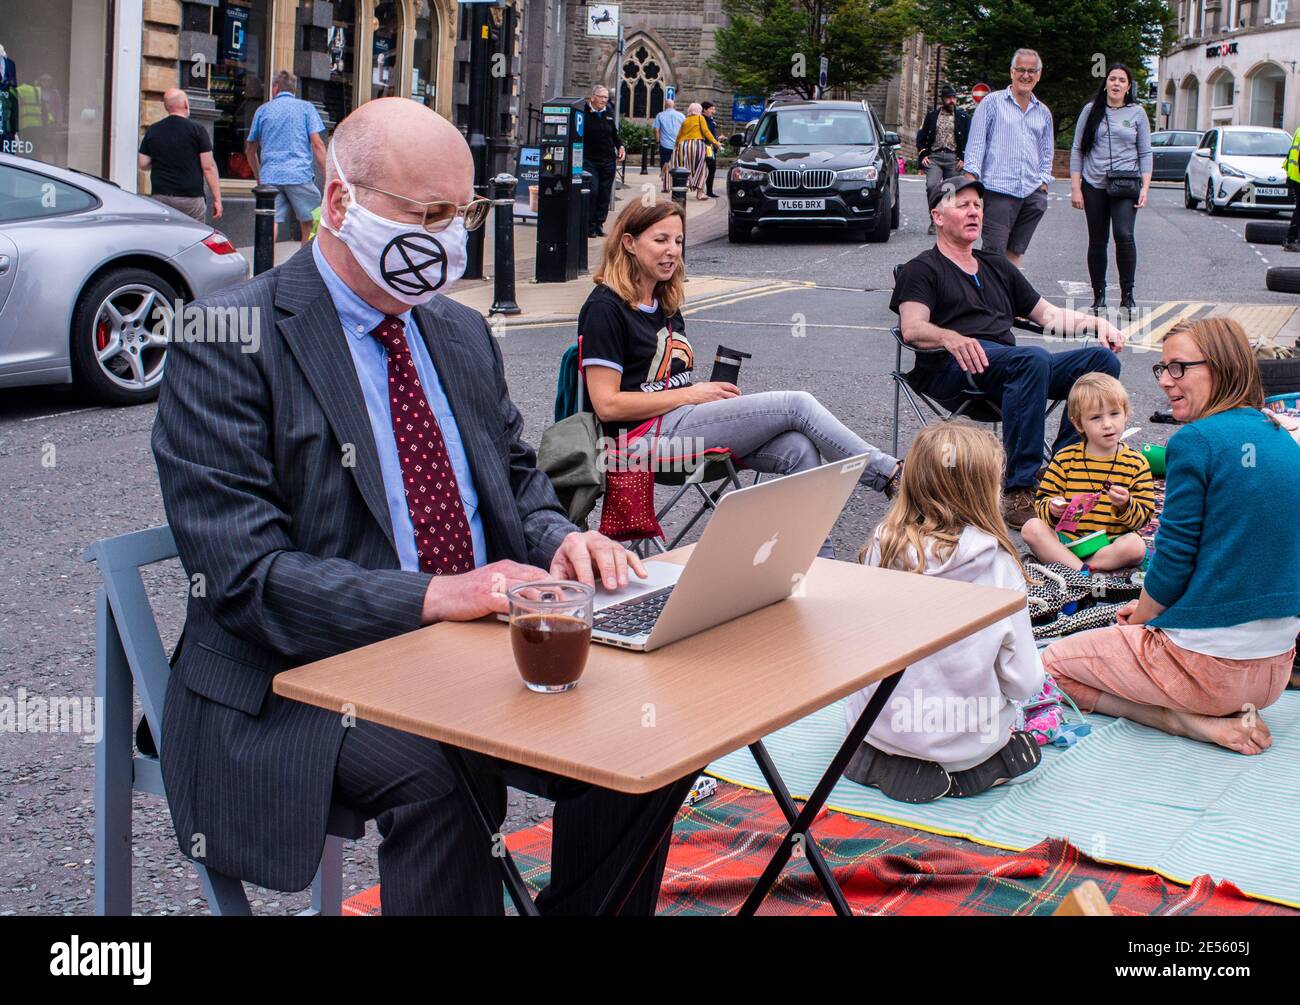 A member of Extinction Rebellion wearing a suit and a branded face mask takes part in a protest to reclaim public areas by putting up his own office in the middle of a parking area. Stock Photo